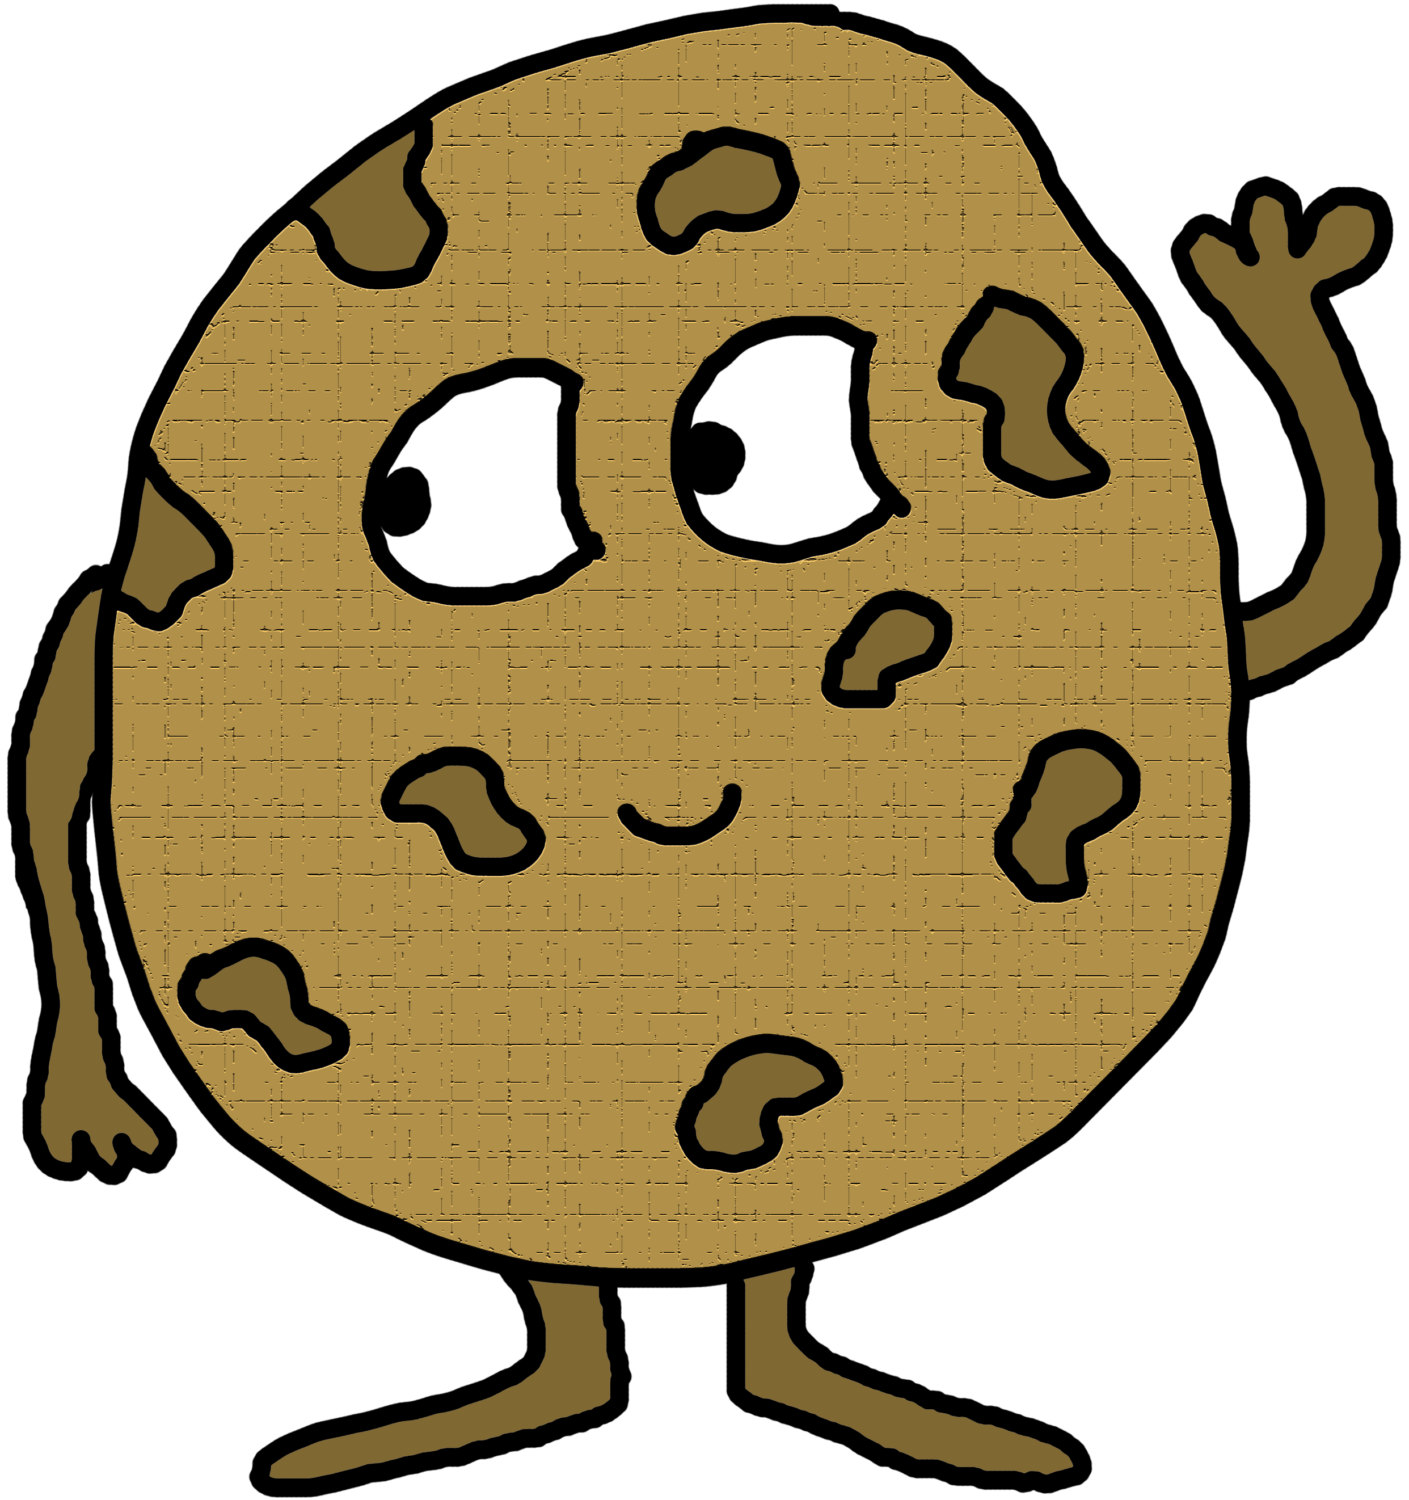 cookie clipart